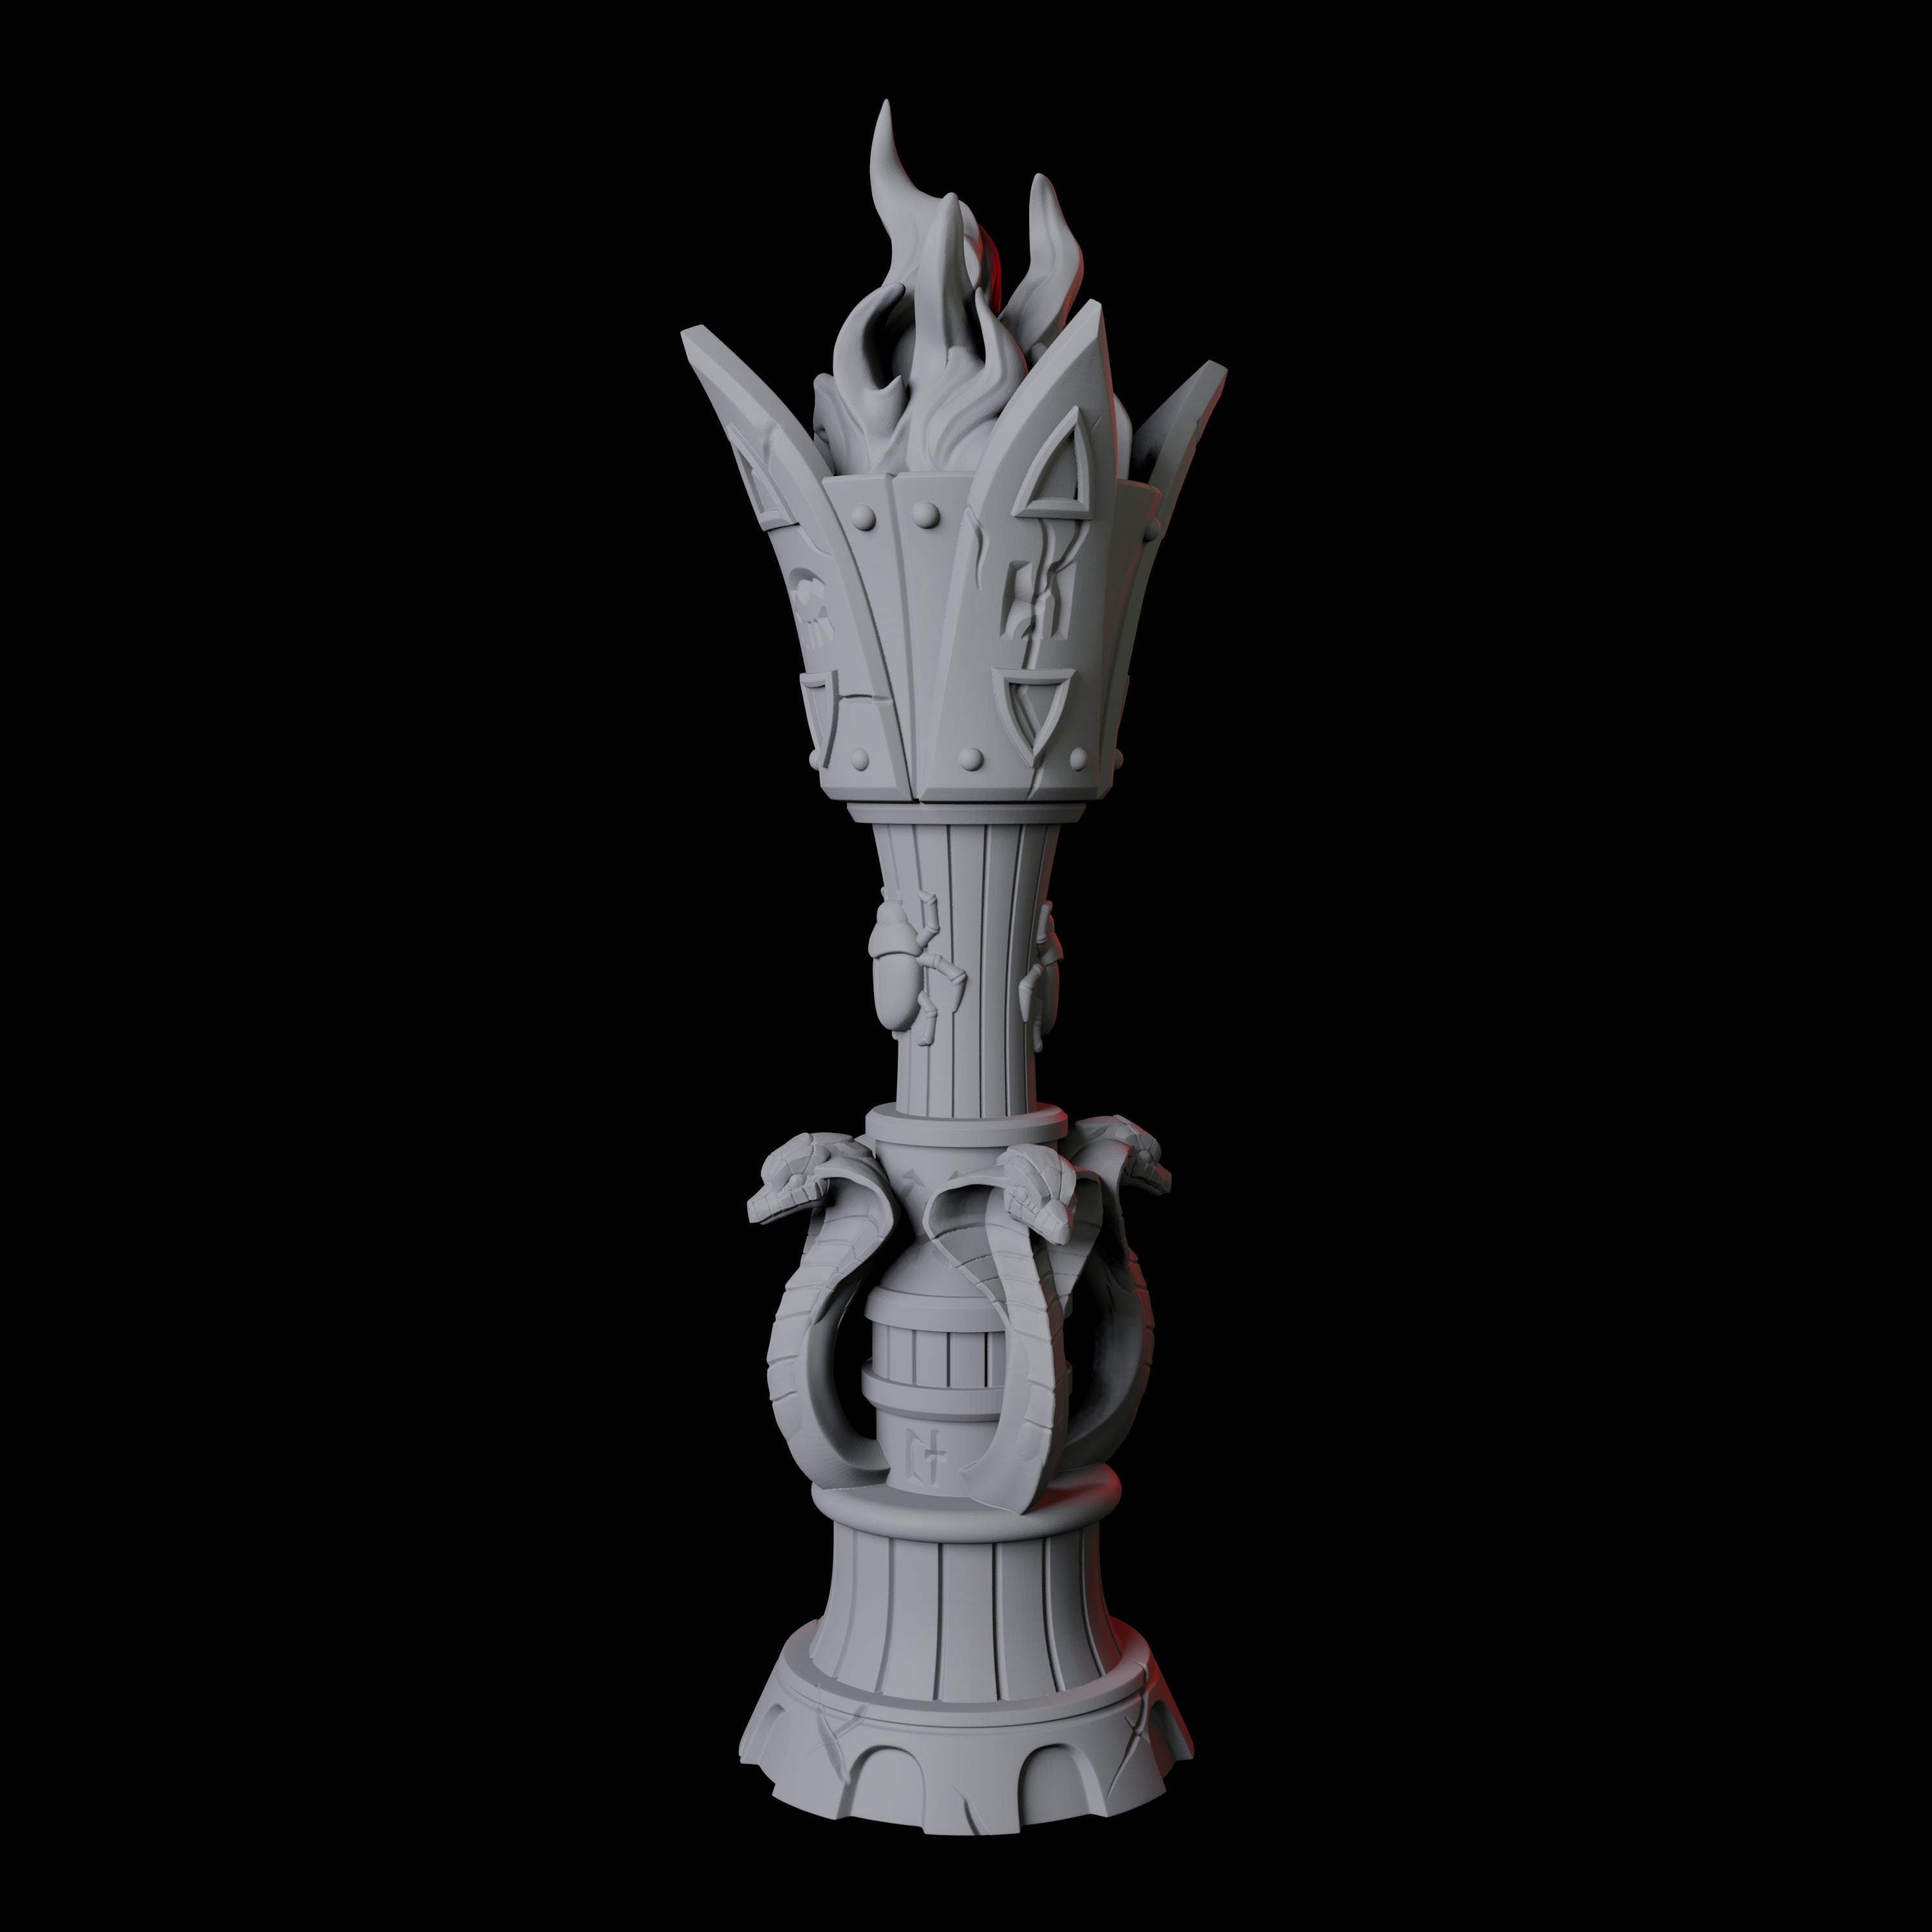 Ancient Egyptian Torch Miniature for Dungeons and Dragons, Pathfinder or other TTRPGs